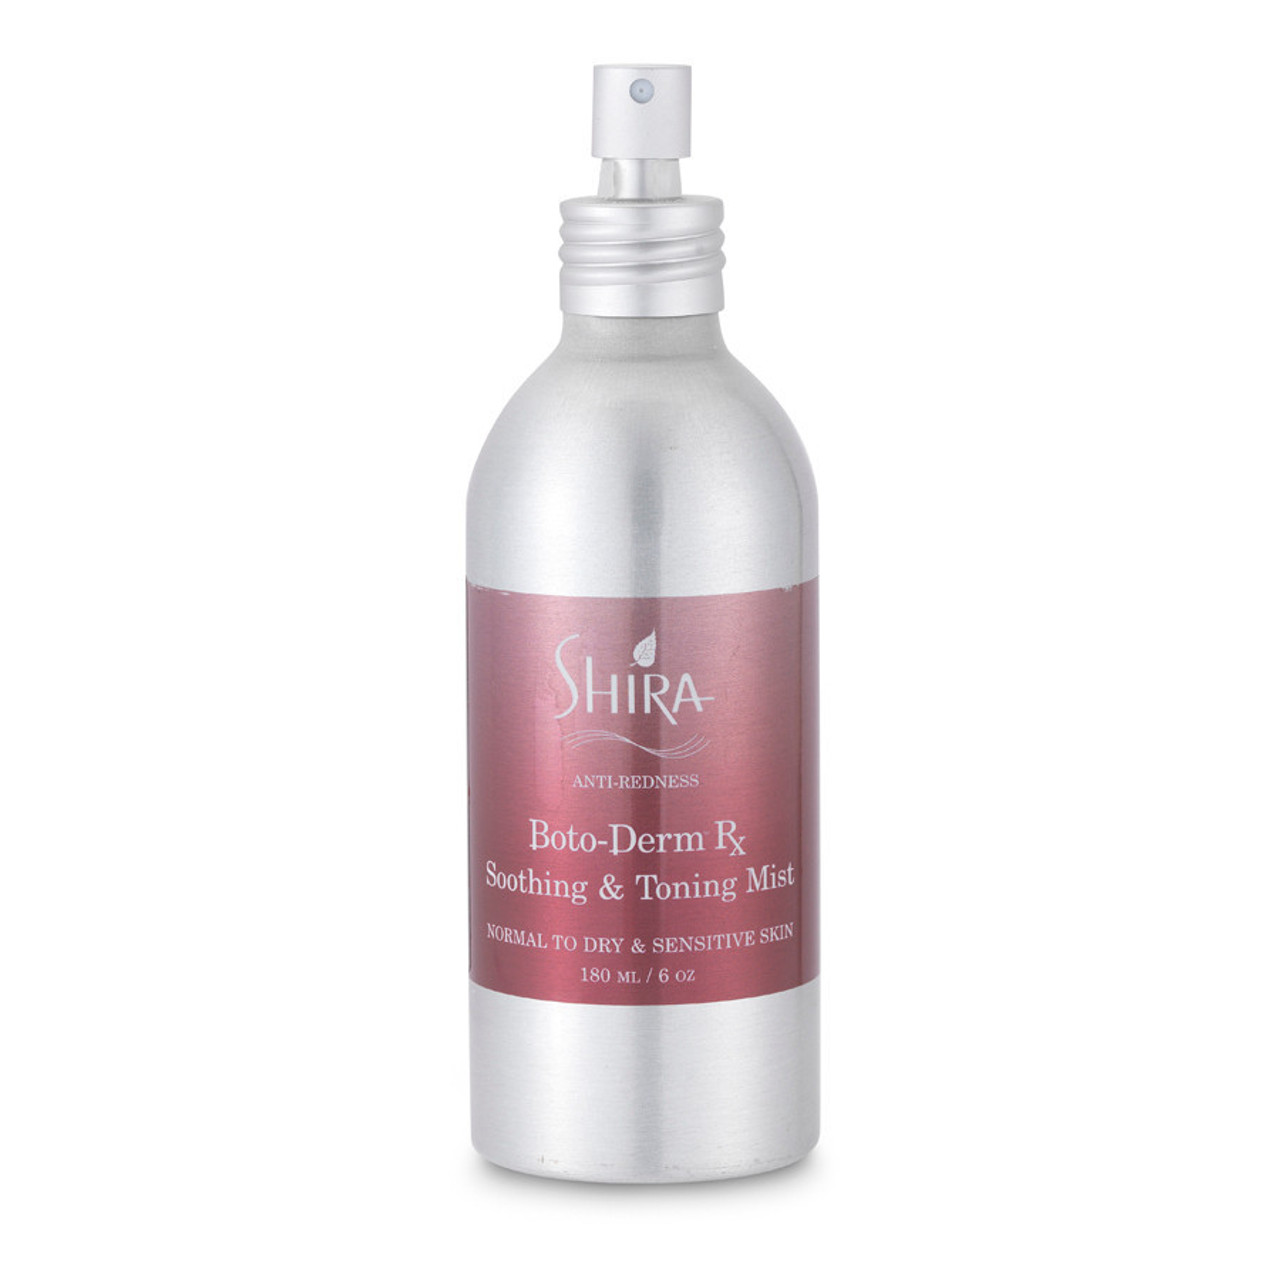 Soothing and Toning Mist PRO by Shira Boto-Derm Rx